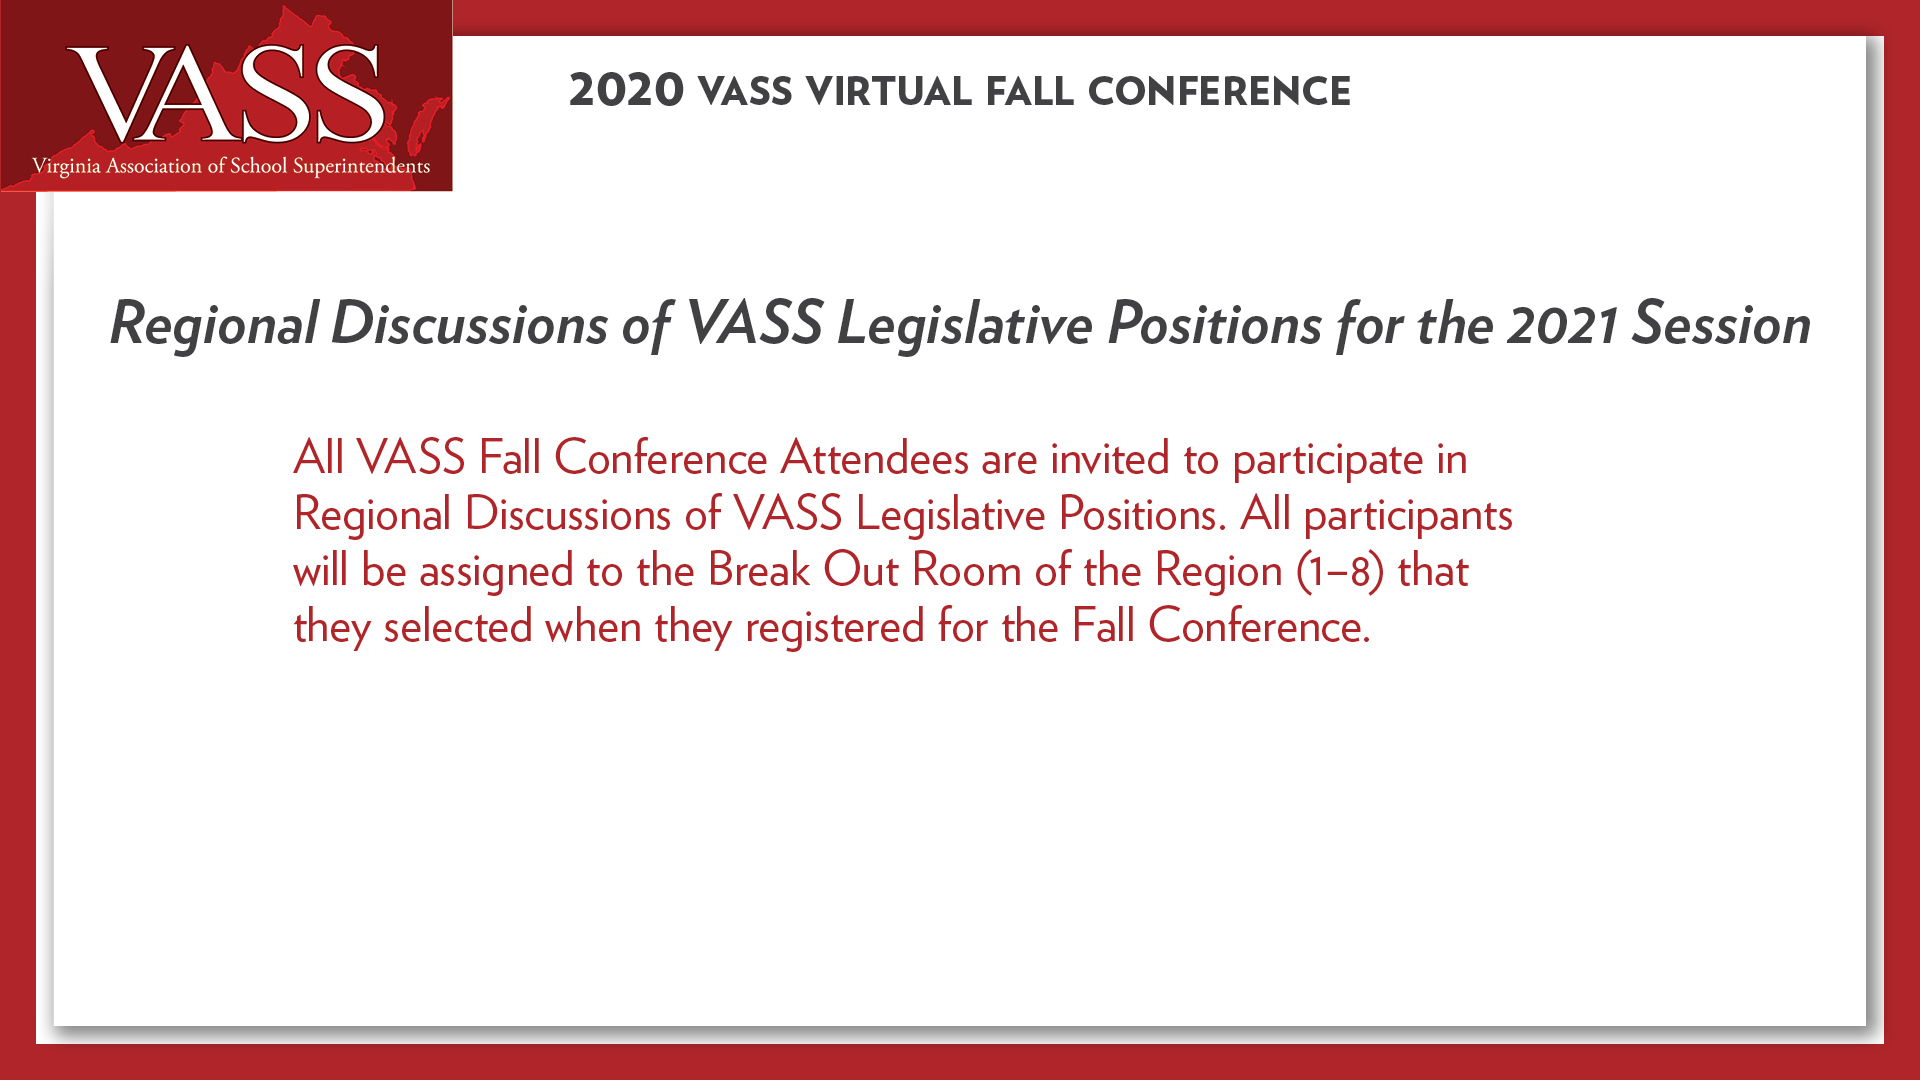 Resources from the 2020 VASS Fall Virtual Conference